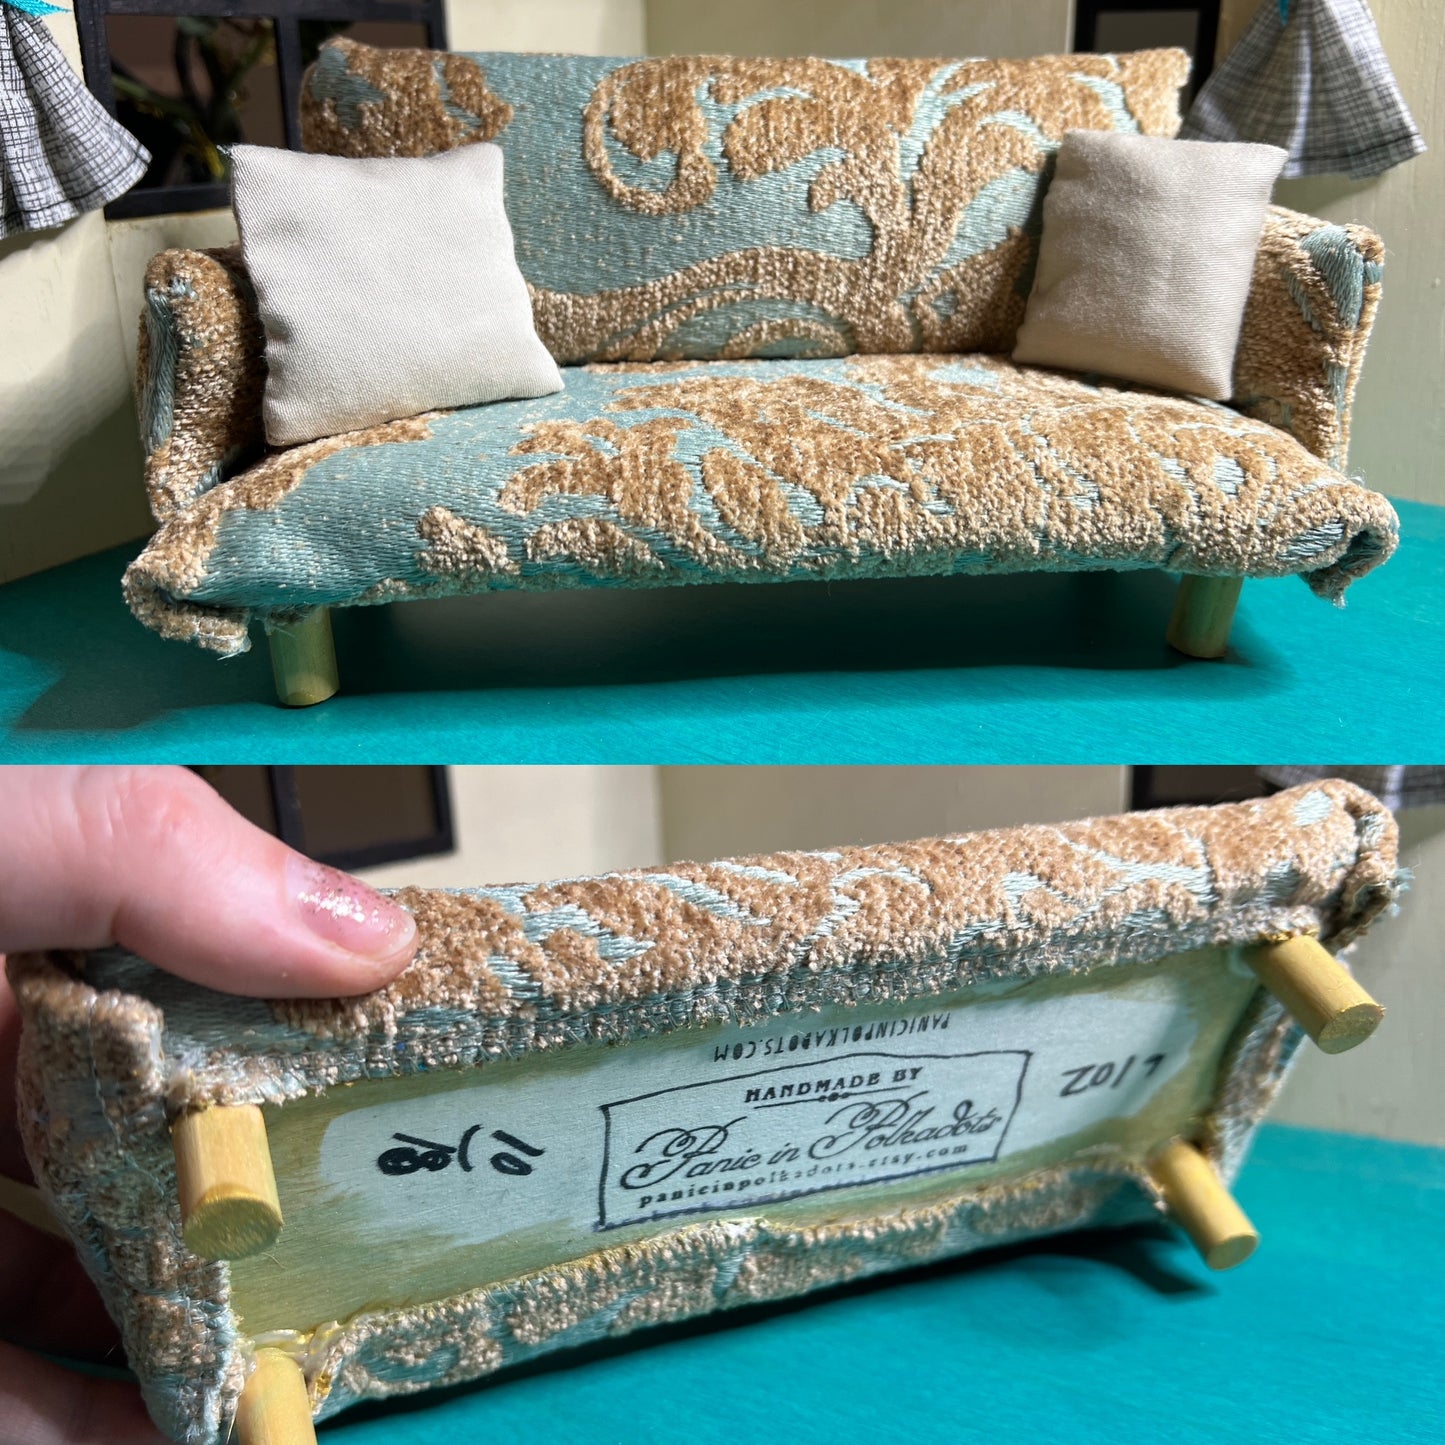 a miniature dollhouse couch, top picture is front view, bottom picture shows underside of couch with item number, year created, and "Panic in Polkadots" stamp on underside